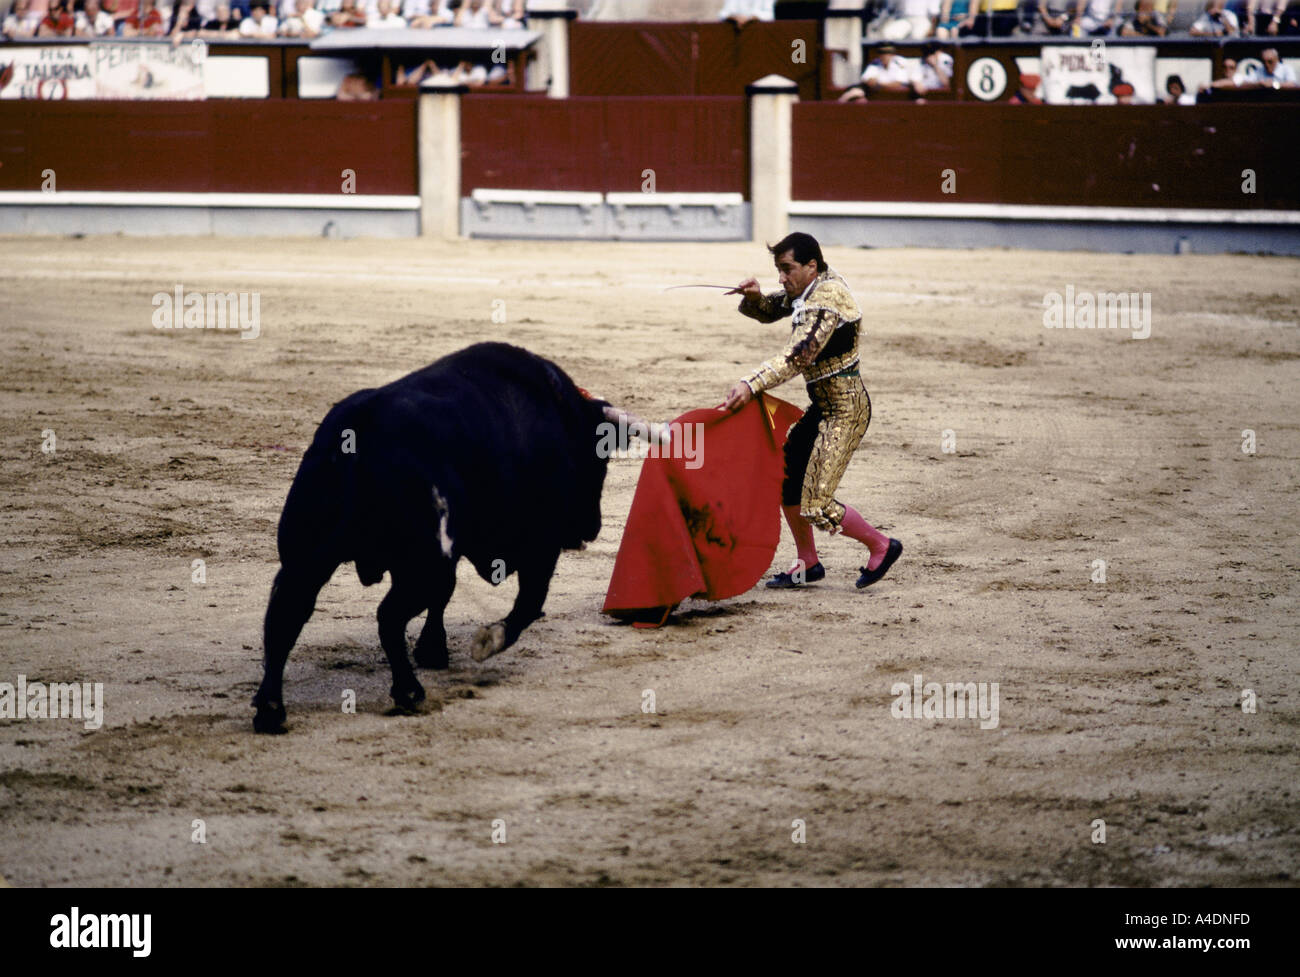 Matador Luis Fransisco Espis distracting a  charging bull using a red cape while aiming a  sword, Las Ventas, Madrid Stock Photo